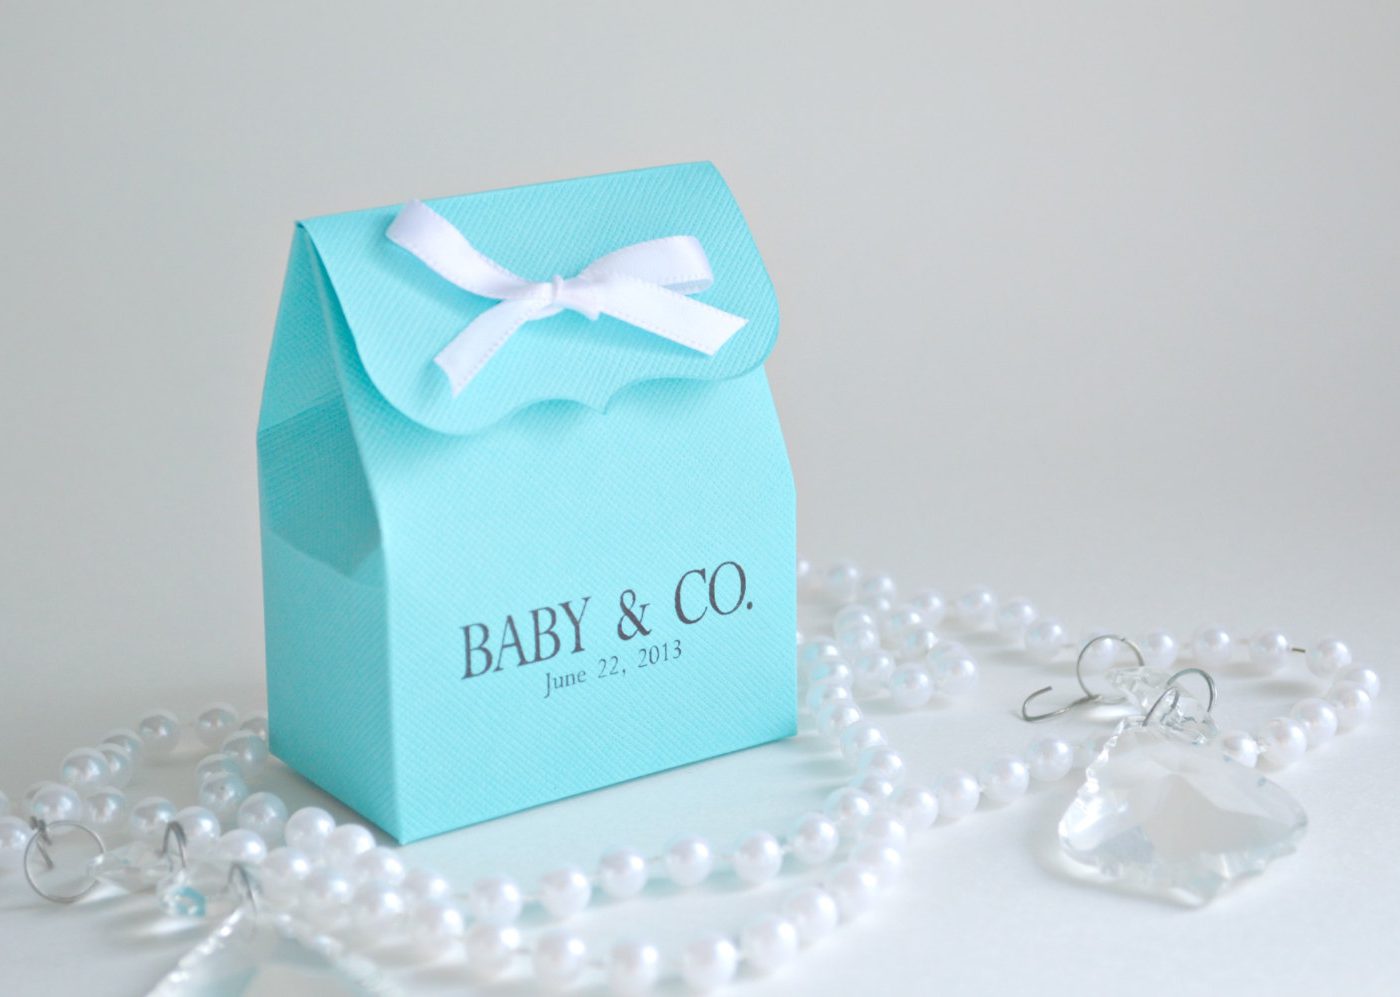 Full Size of Baby Shower:enamour Baby Shower Gifts For Guests Picture Ideas Para Baby Shower Baby Shower Recipes Best Baby Shower Gifts 2018 Fiesta Baby Shower